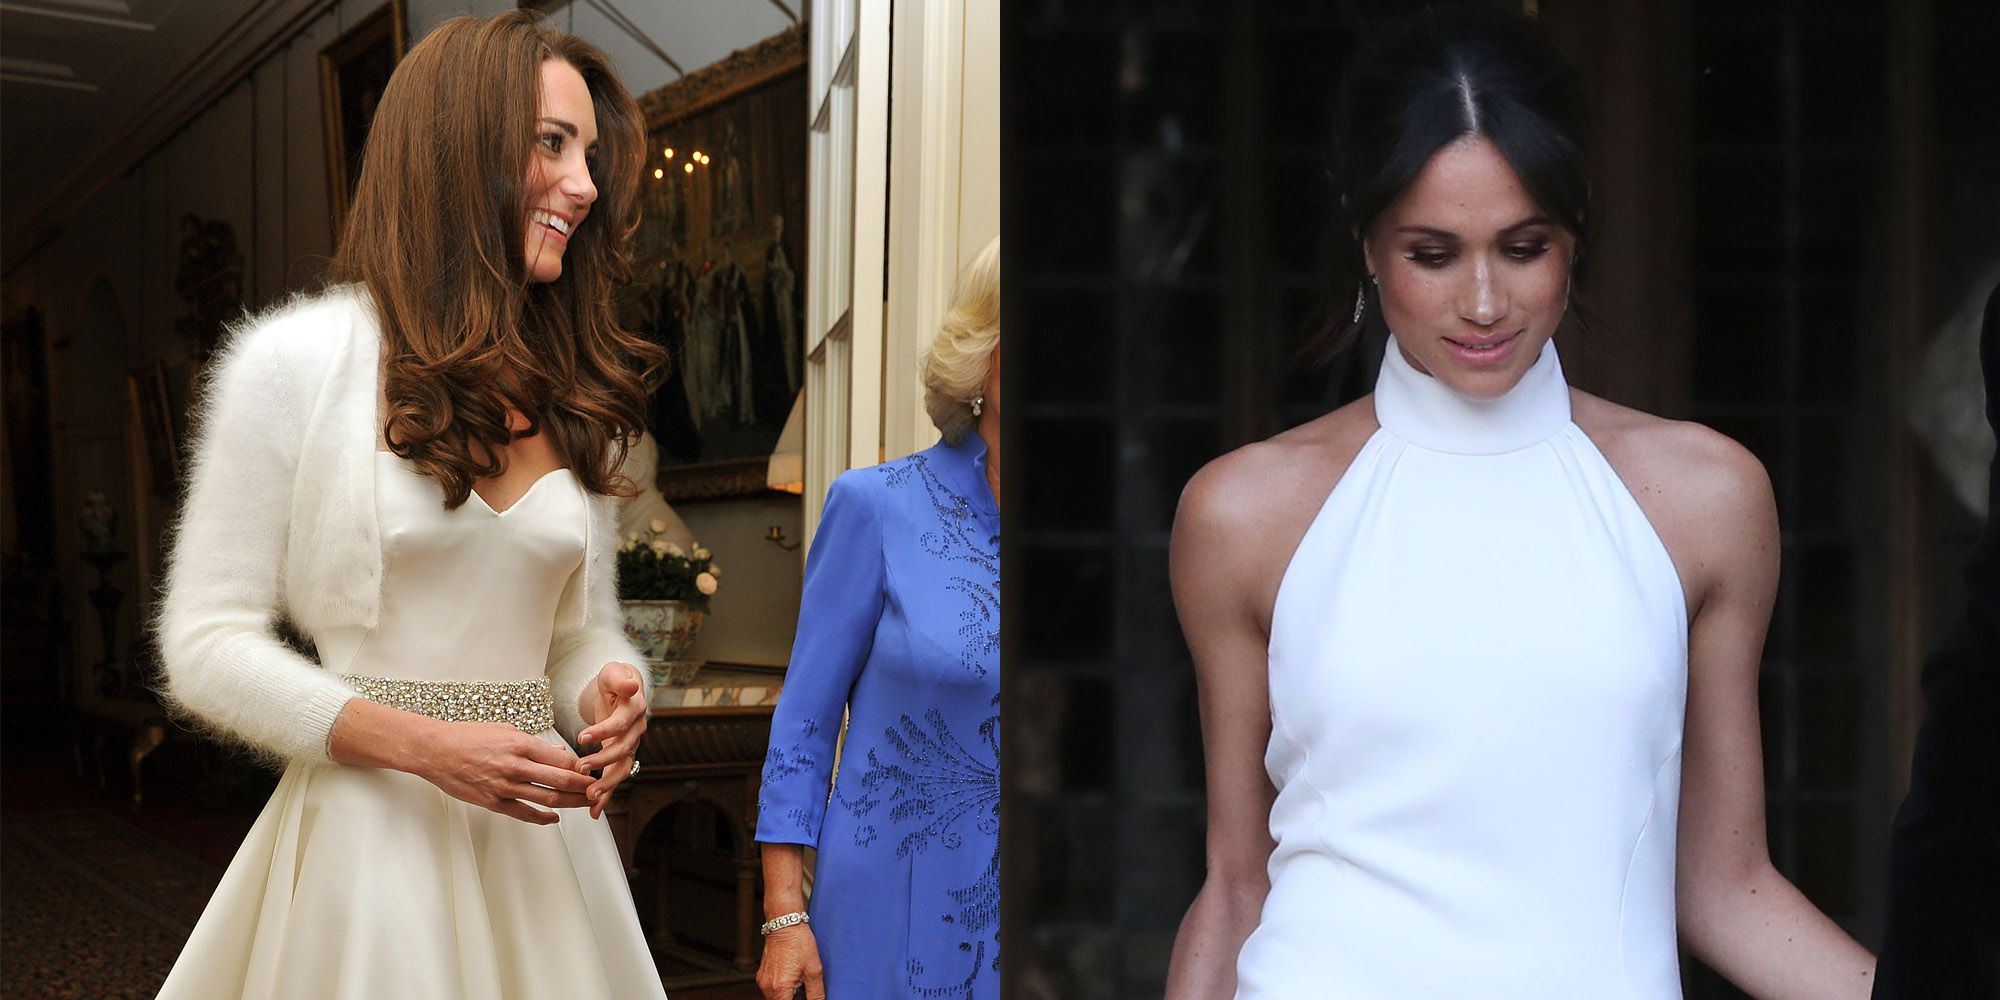 Kate Middleton's Diplomatic Reception Dress Is by Alexander McQueen